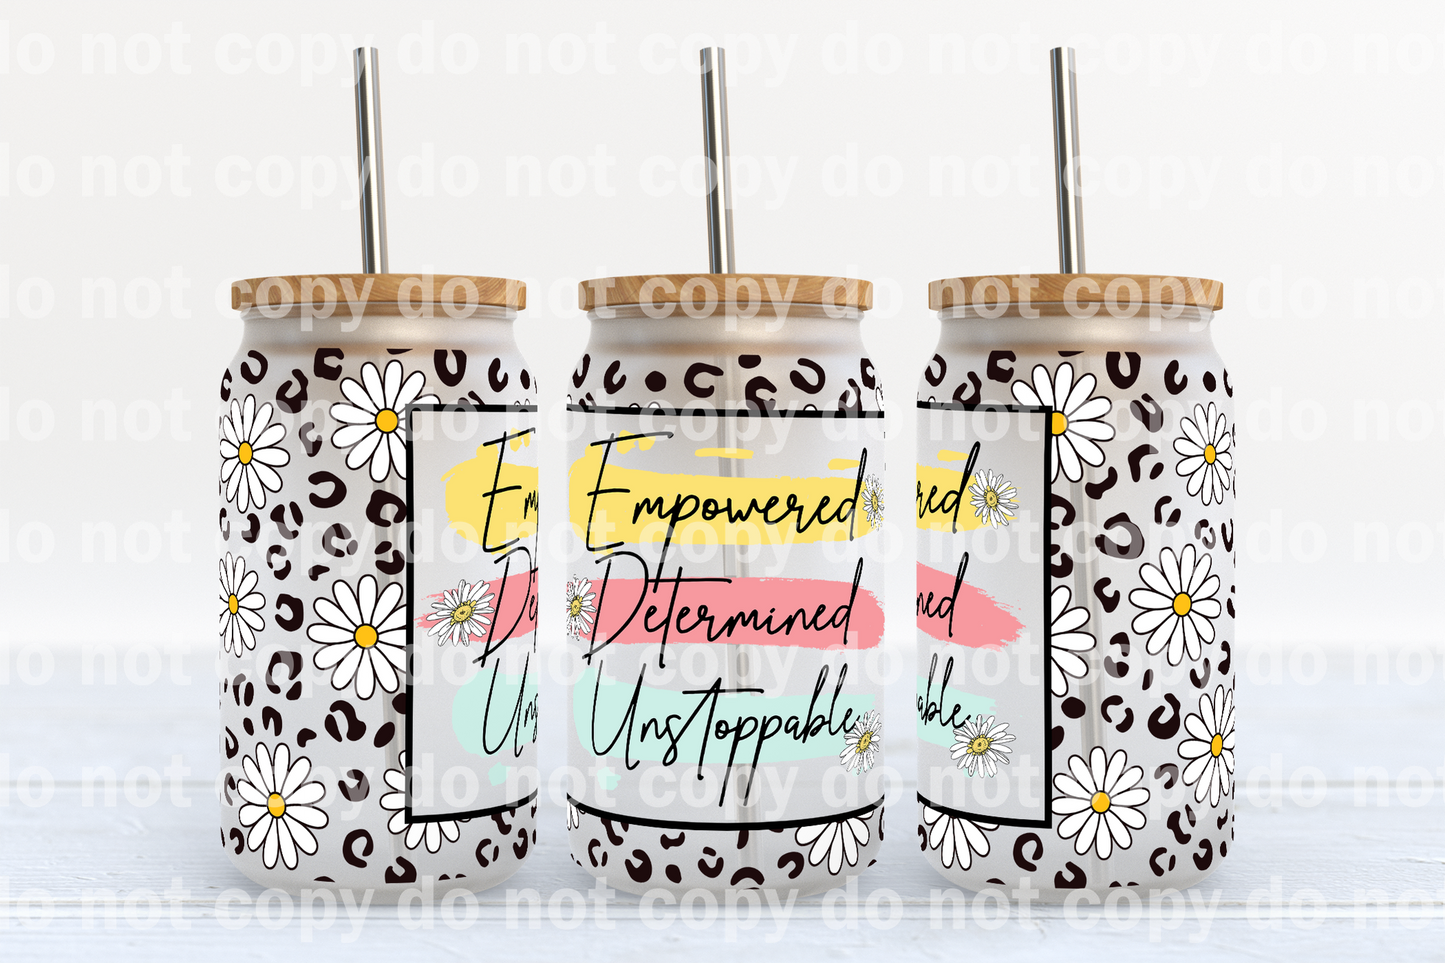 Empowered Determined Unstoppable 16oz Cup Wrap